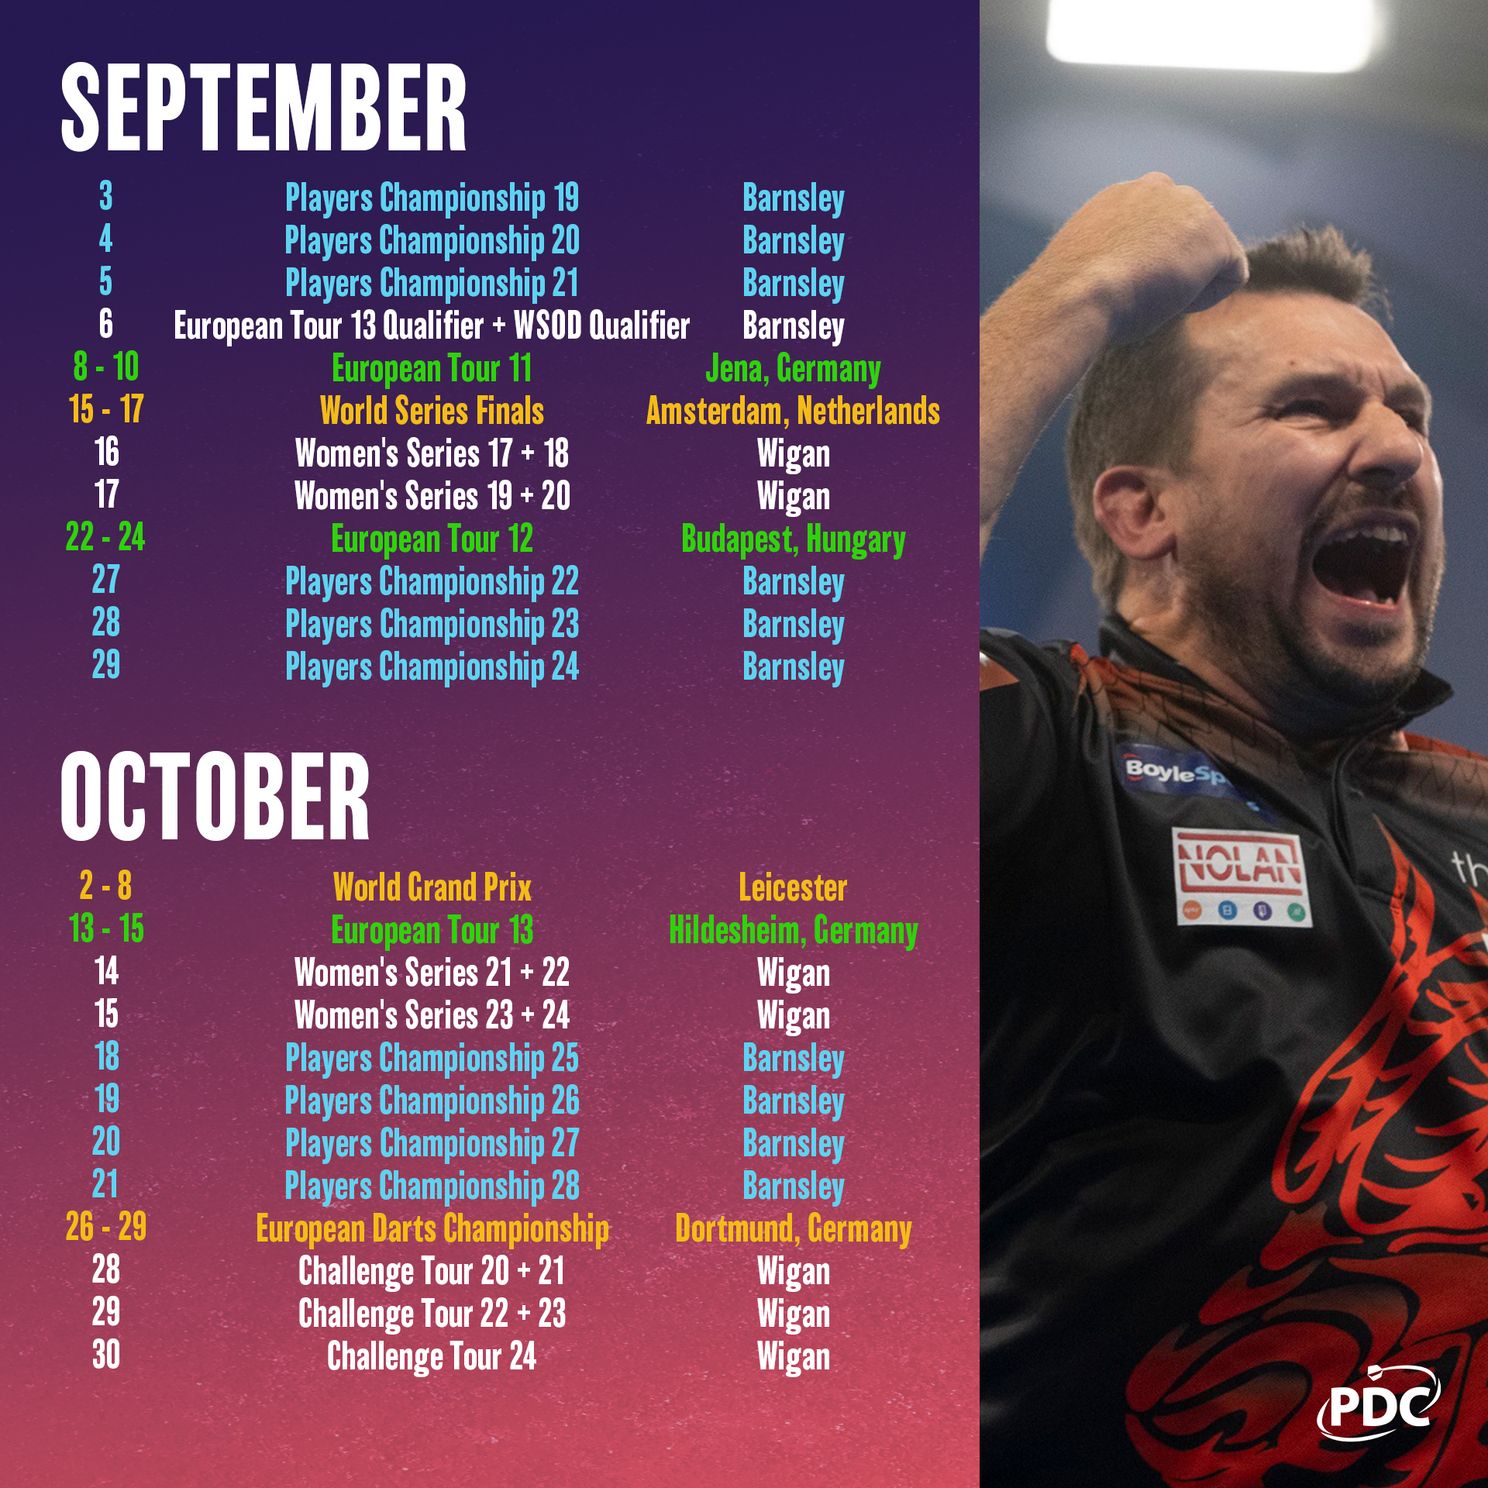 PDC launches darts calendar for 2023: over 170 tournament days in the